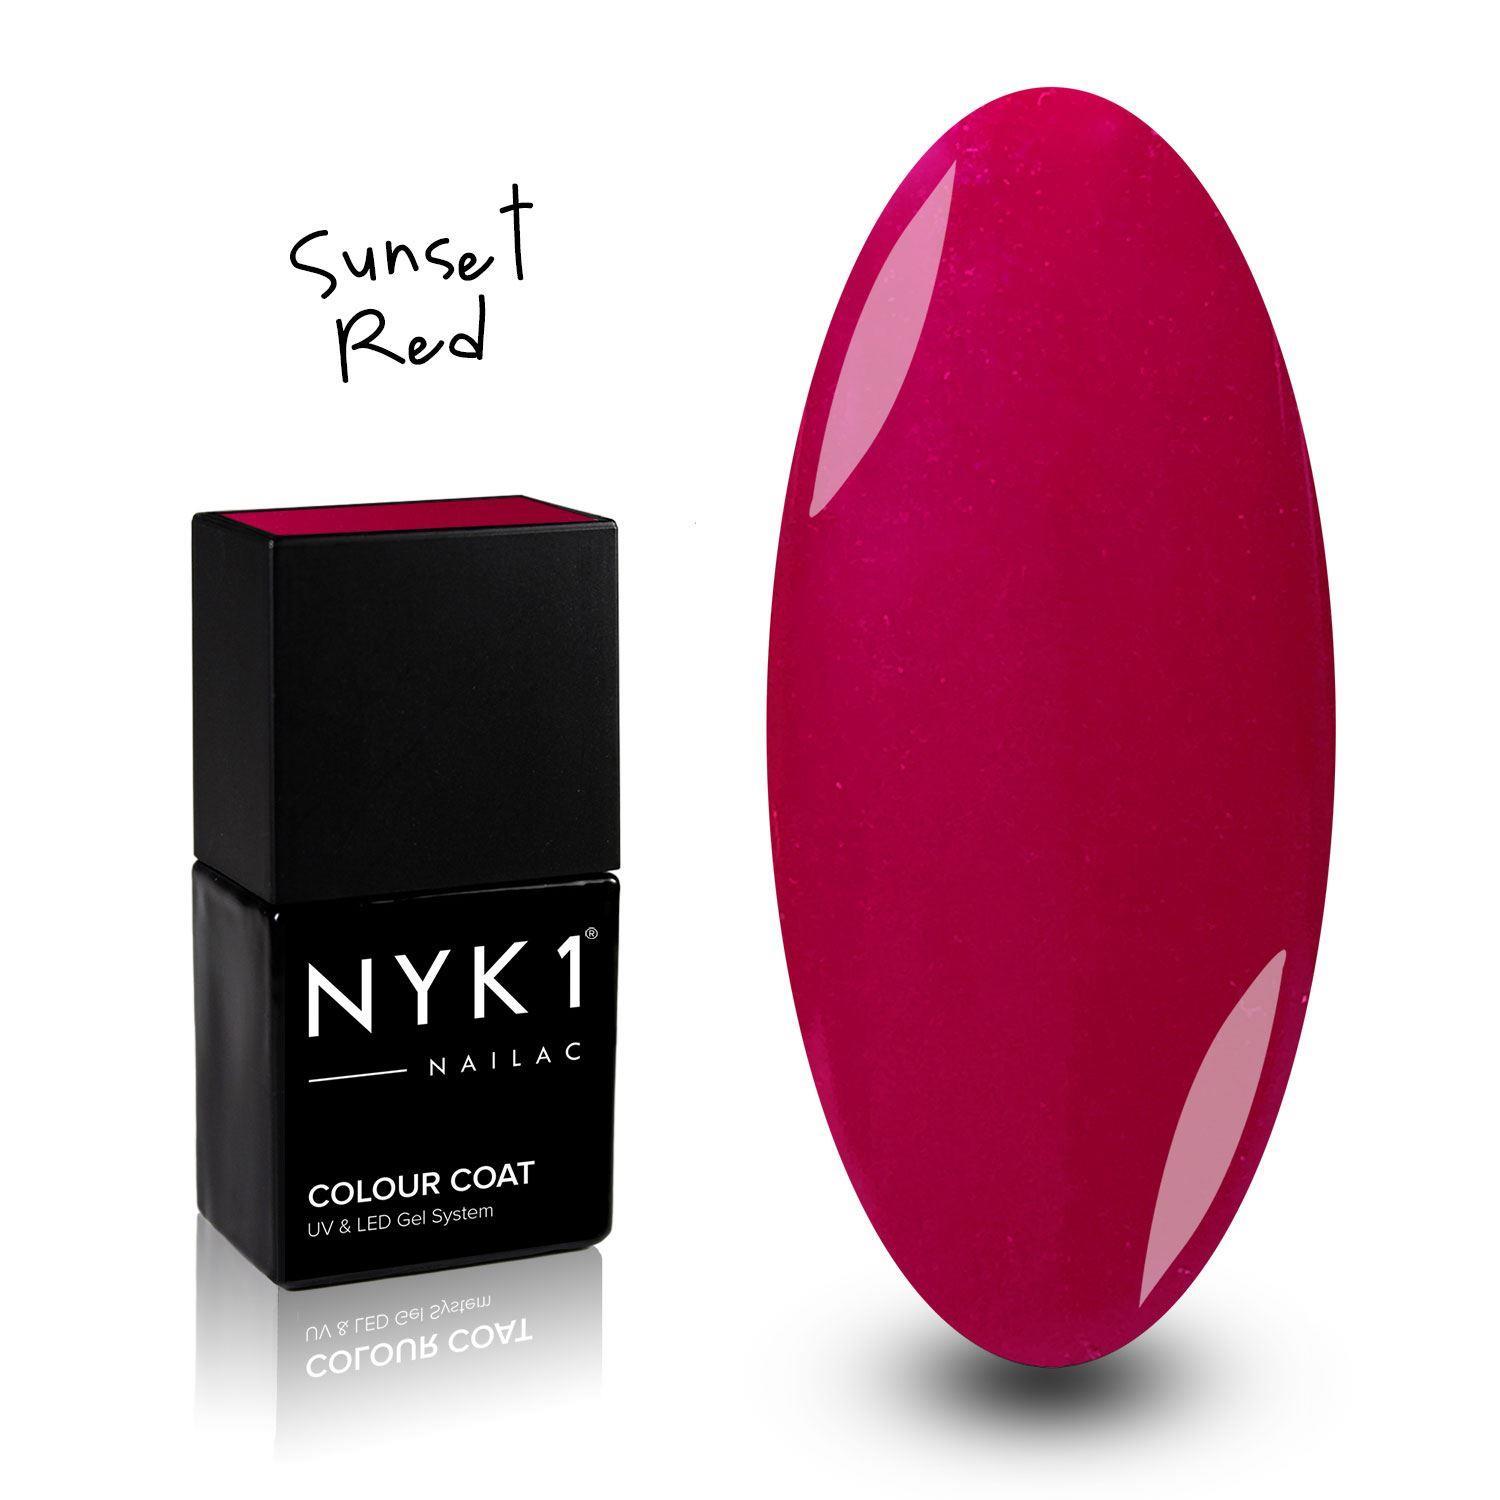 Nailac Sunset Red Gel Polish for nails by NYK1